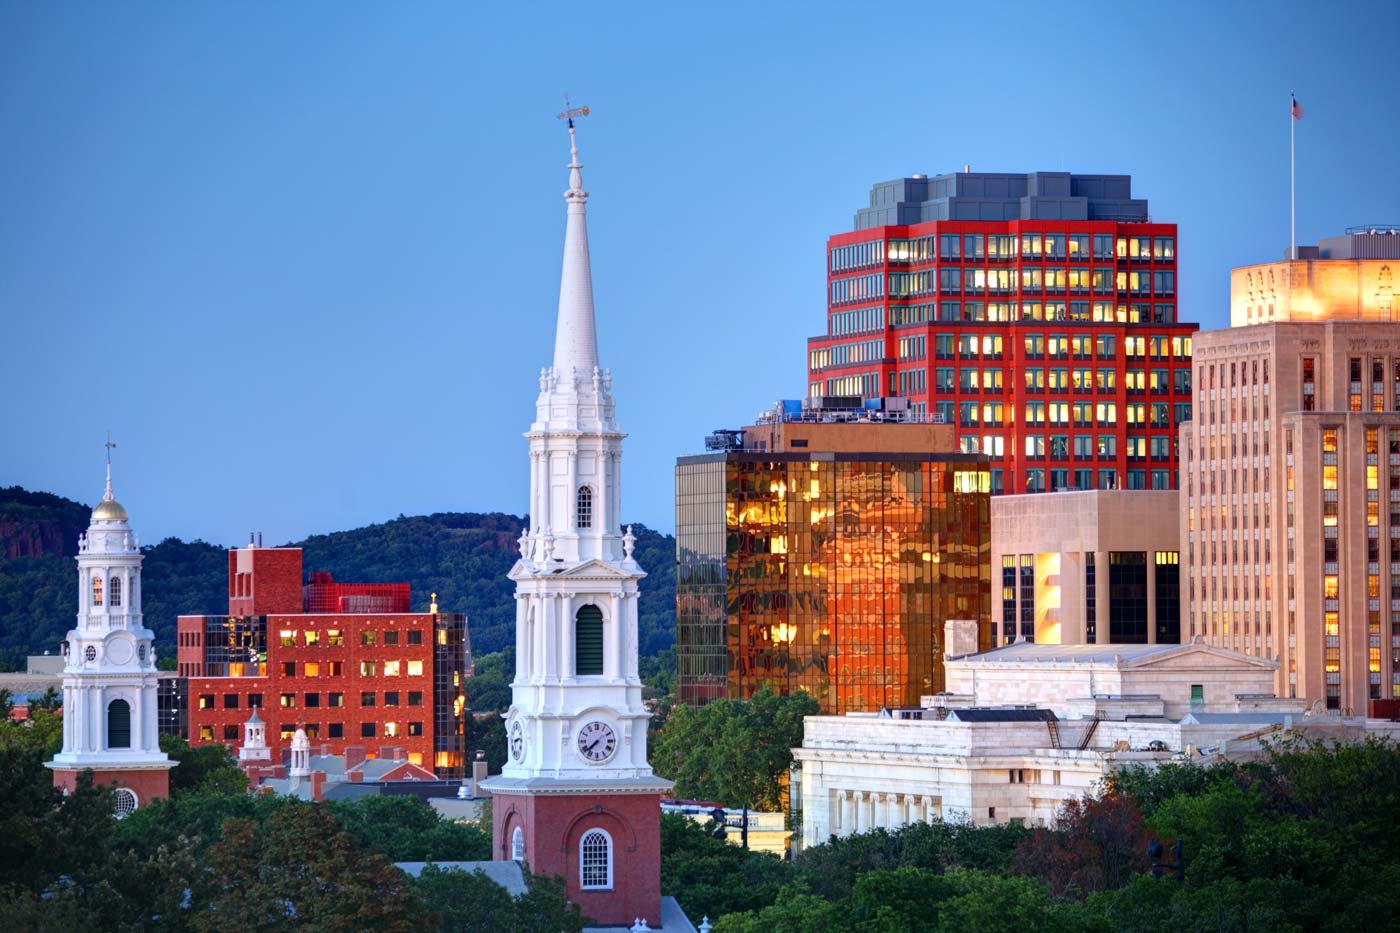 The tops of buildings (including a clocktower) in New Haven, Connecticut